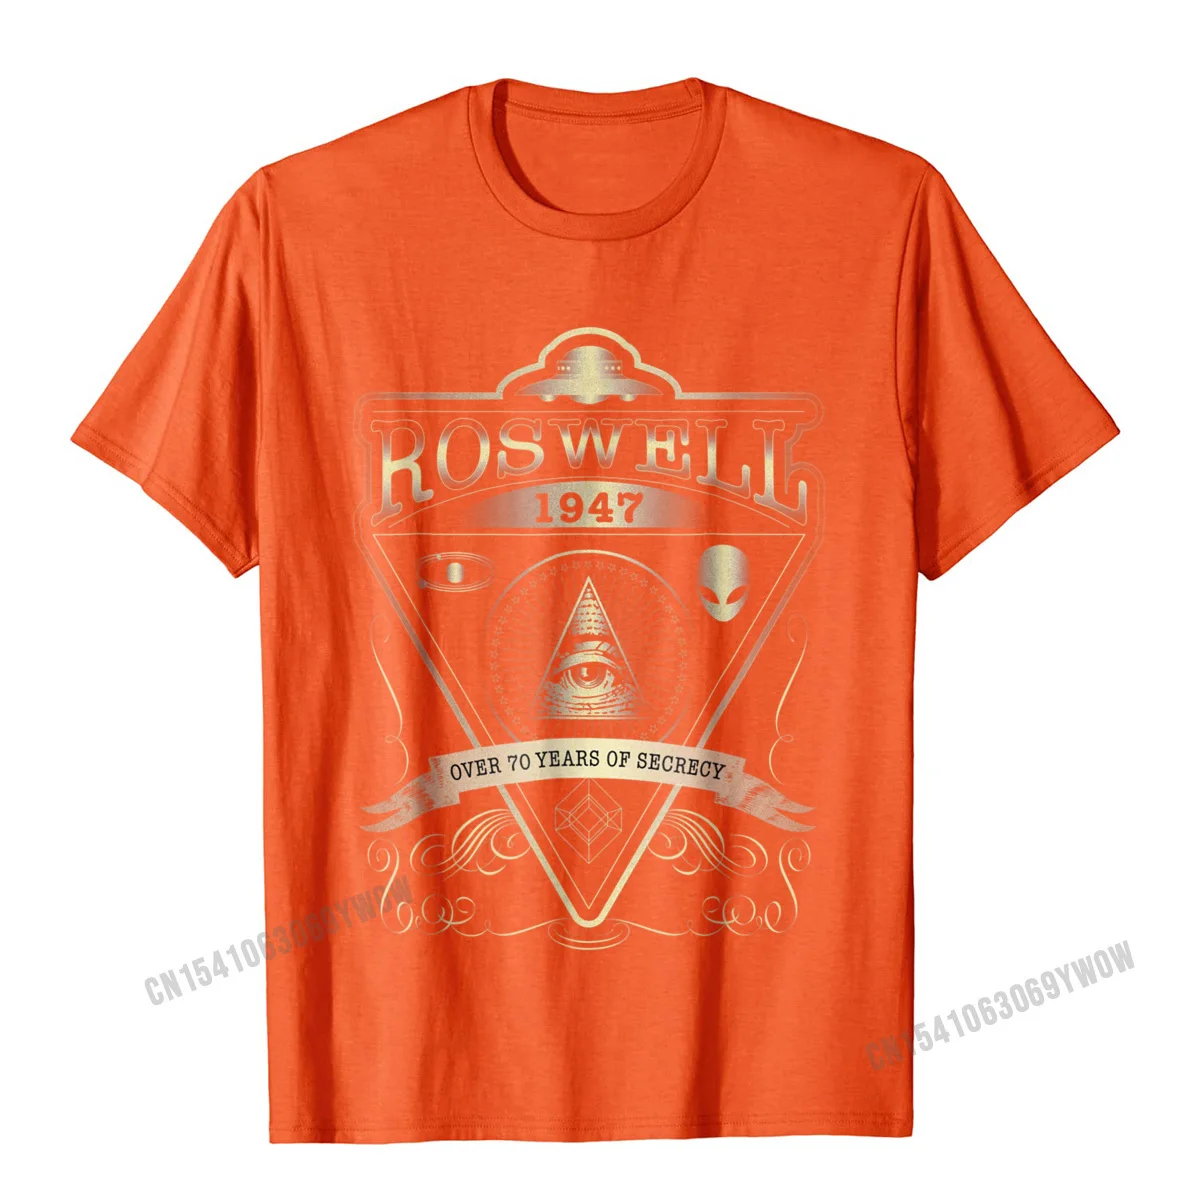 Fitness Tight cosie O Neck Tshirts Summer/Autumn Tops & Tees Short Sleeve for Adult Coupons Pure Cotton Casual T-Shirt Roswell 1947 Alien T Shirt - Vintage Style UFO Area 51__1093 orange